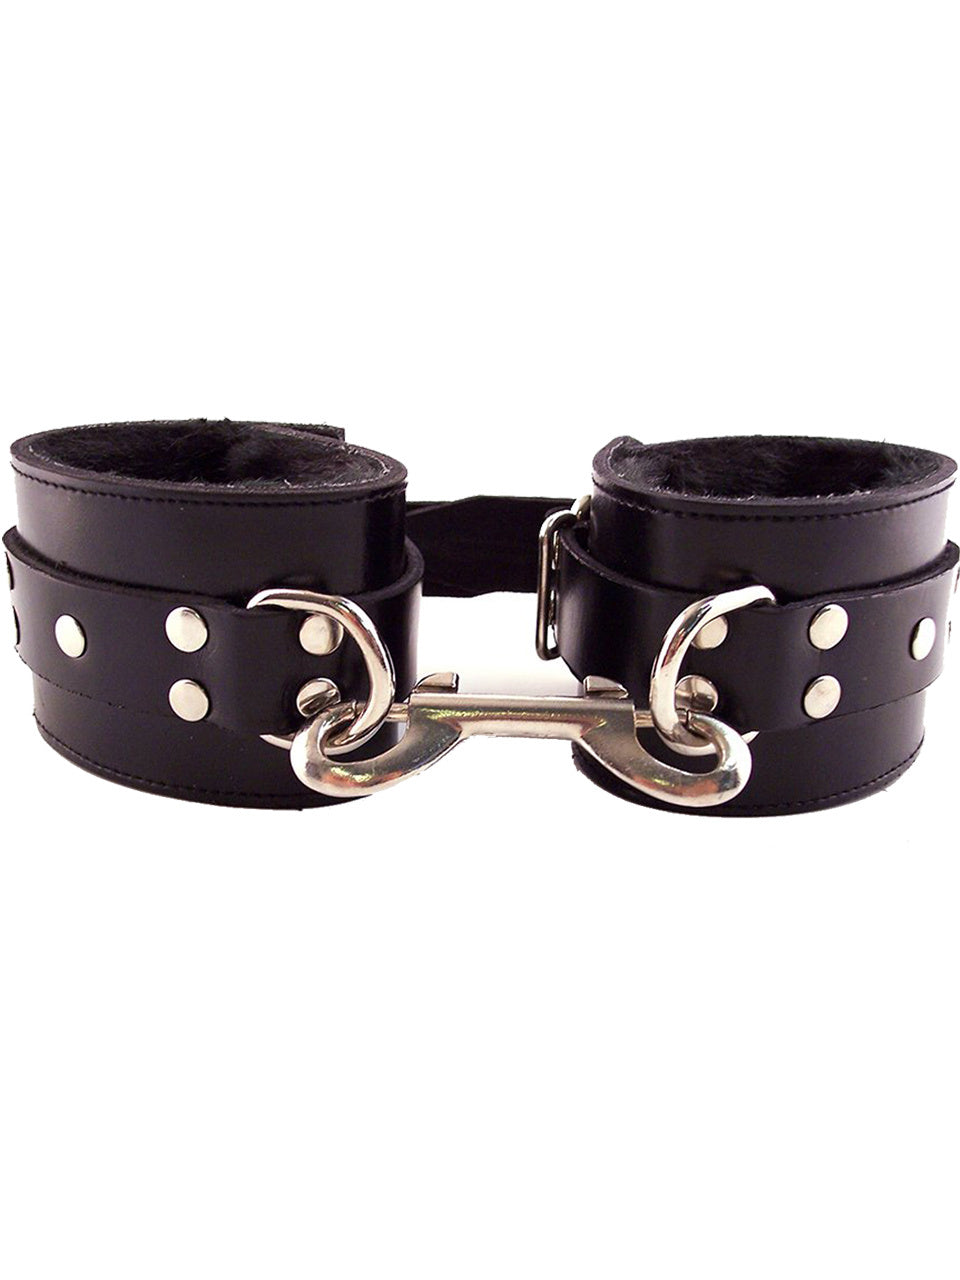 Rouge - Leather Fur Ankle Cuffs - Black